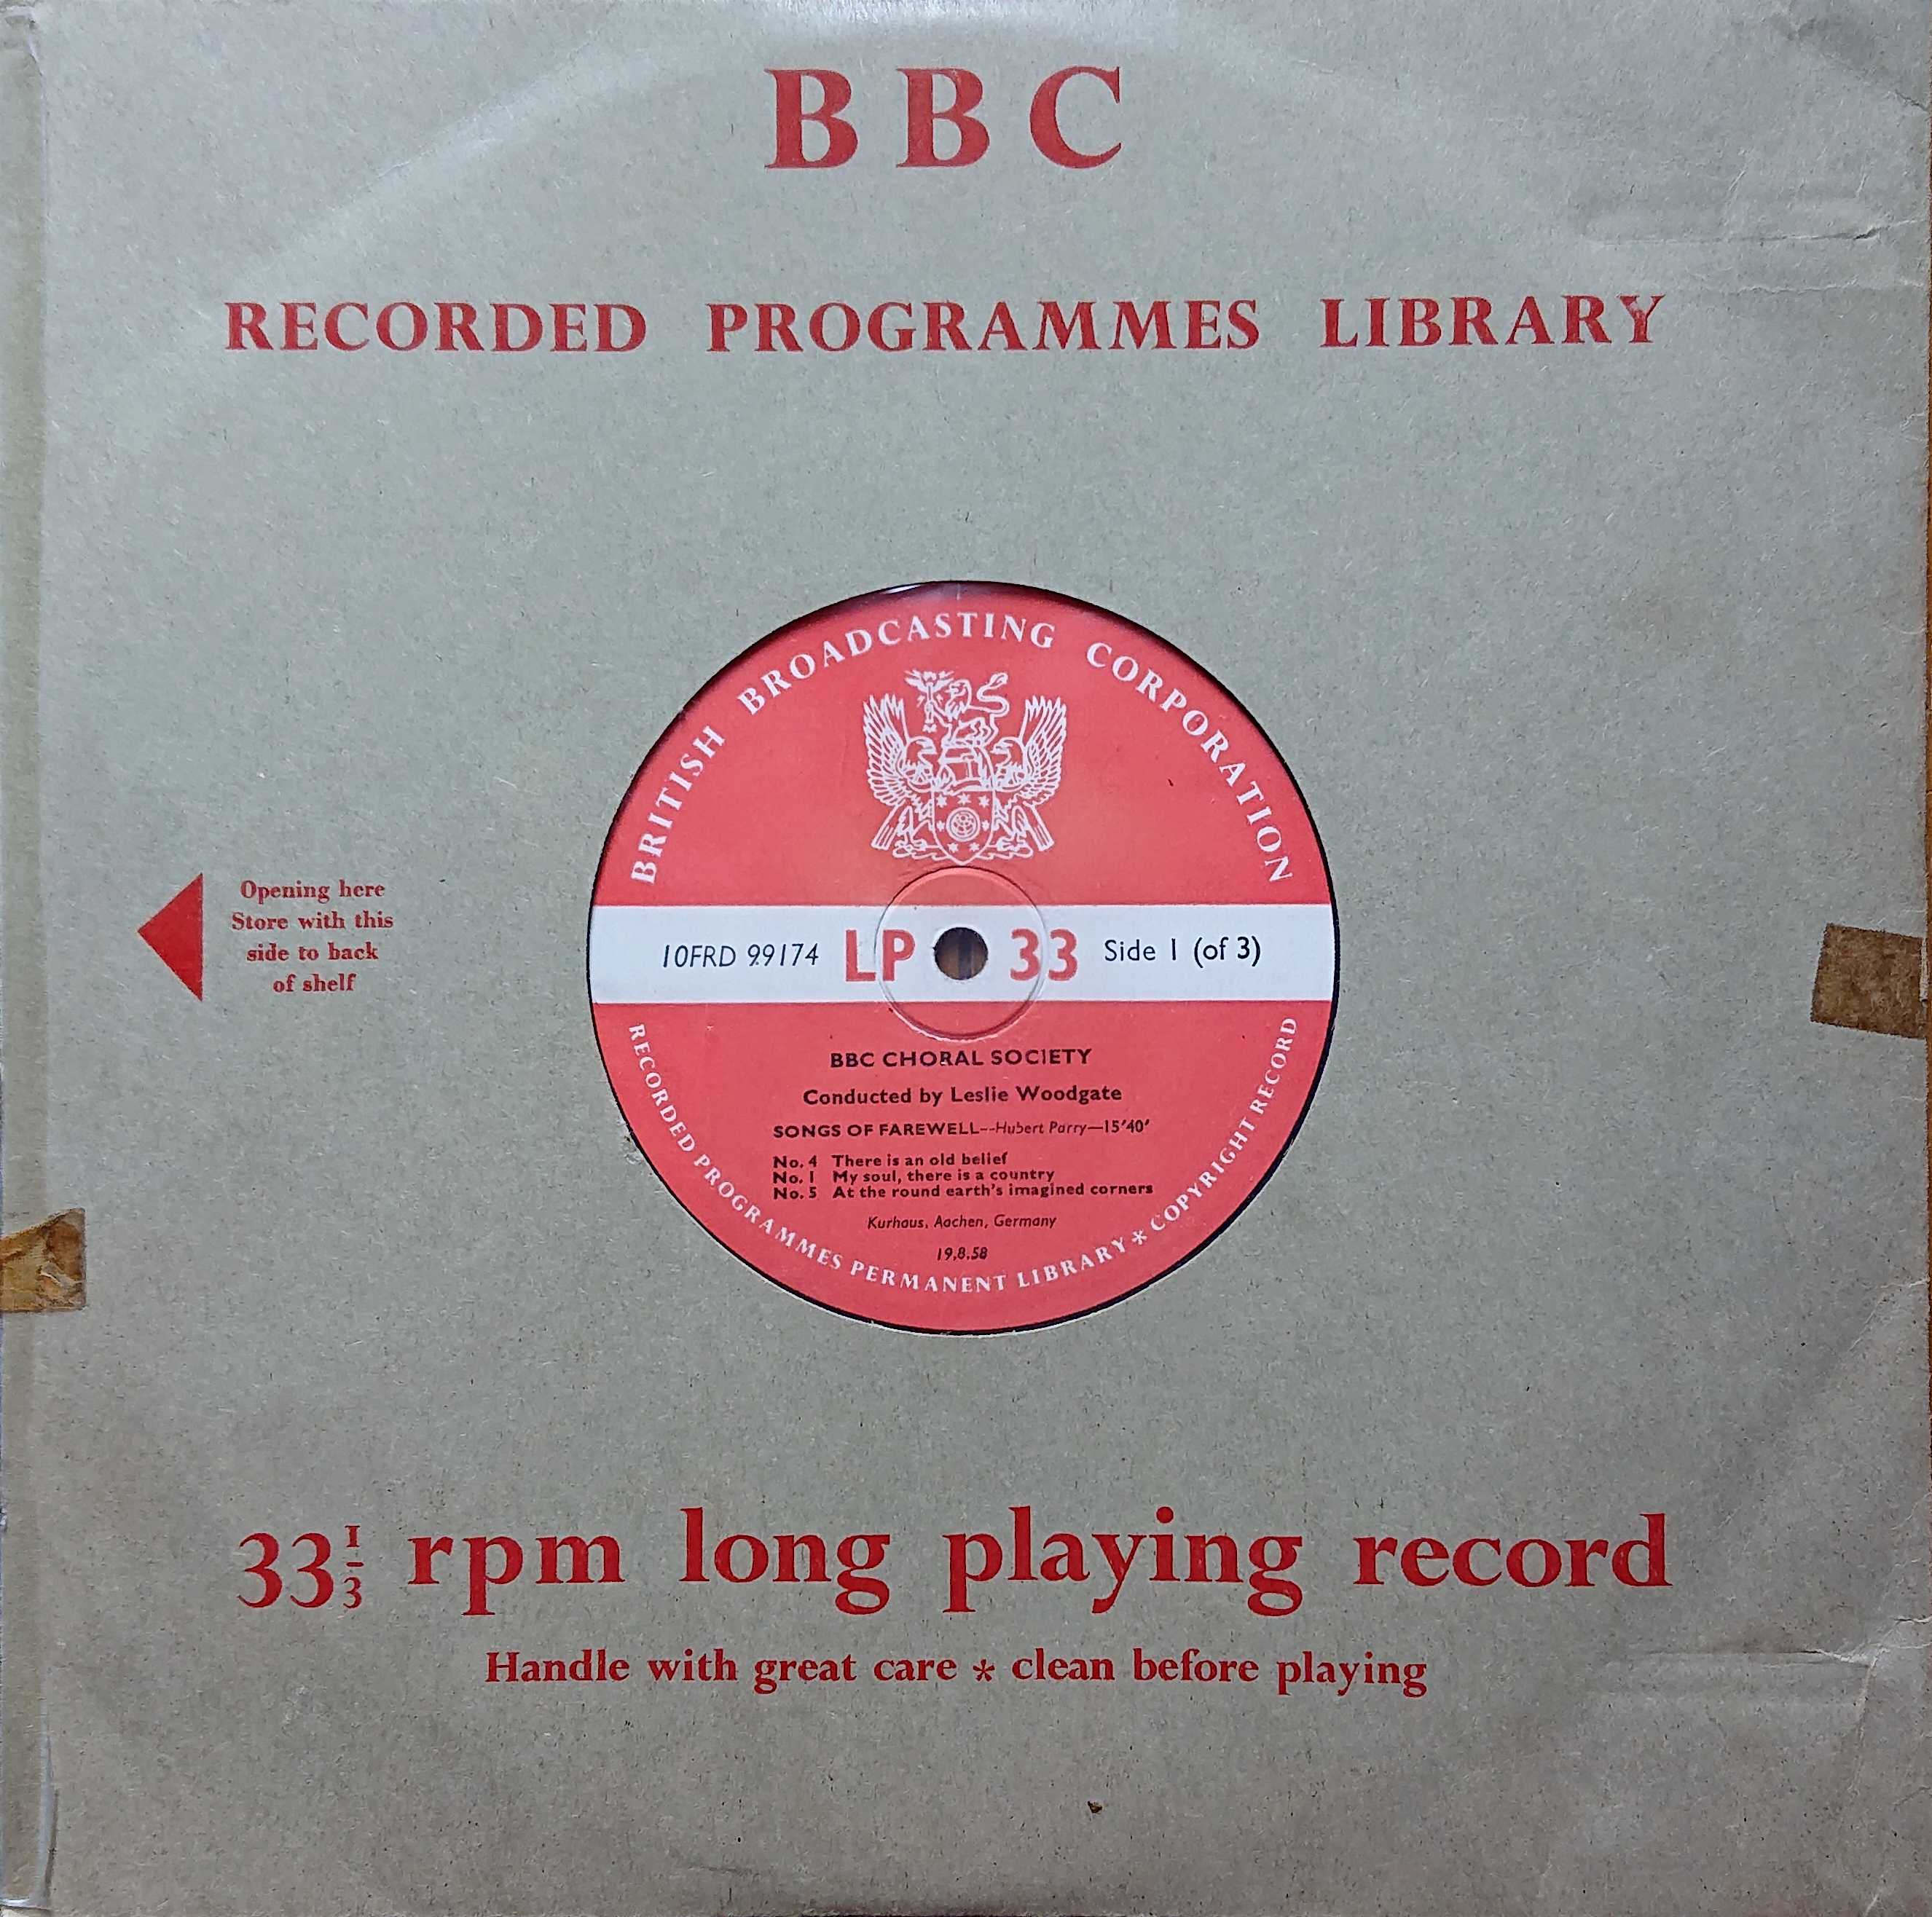 Picture of 10FRD 99174 BBC Choral Society by artist Hubert Parry Samuel Wesley / Arnold Bax from the BBC records and Tapes library